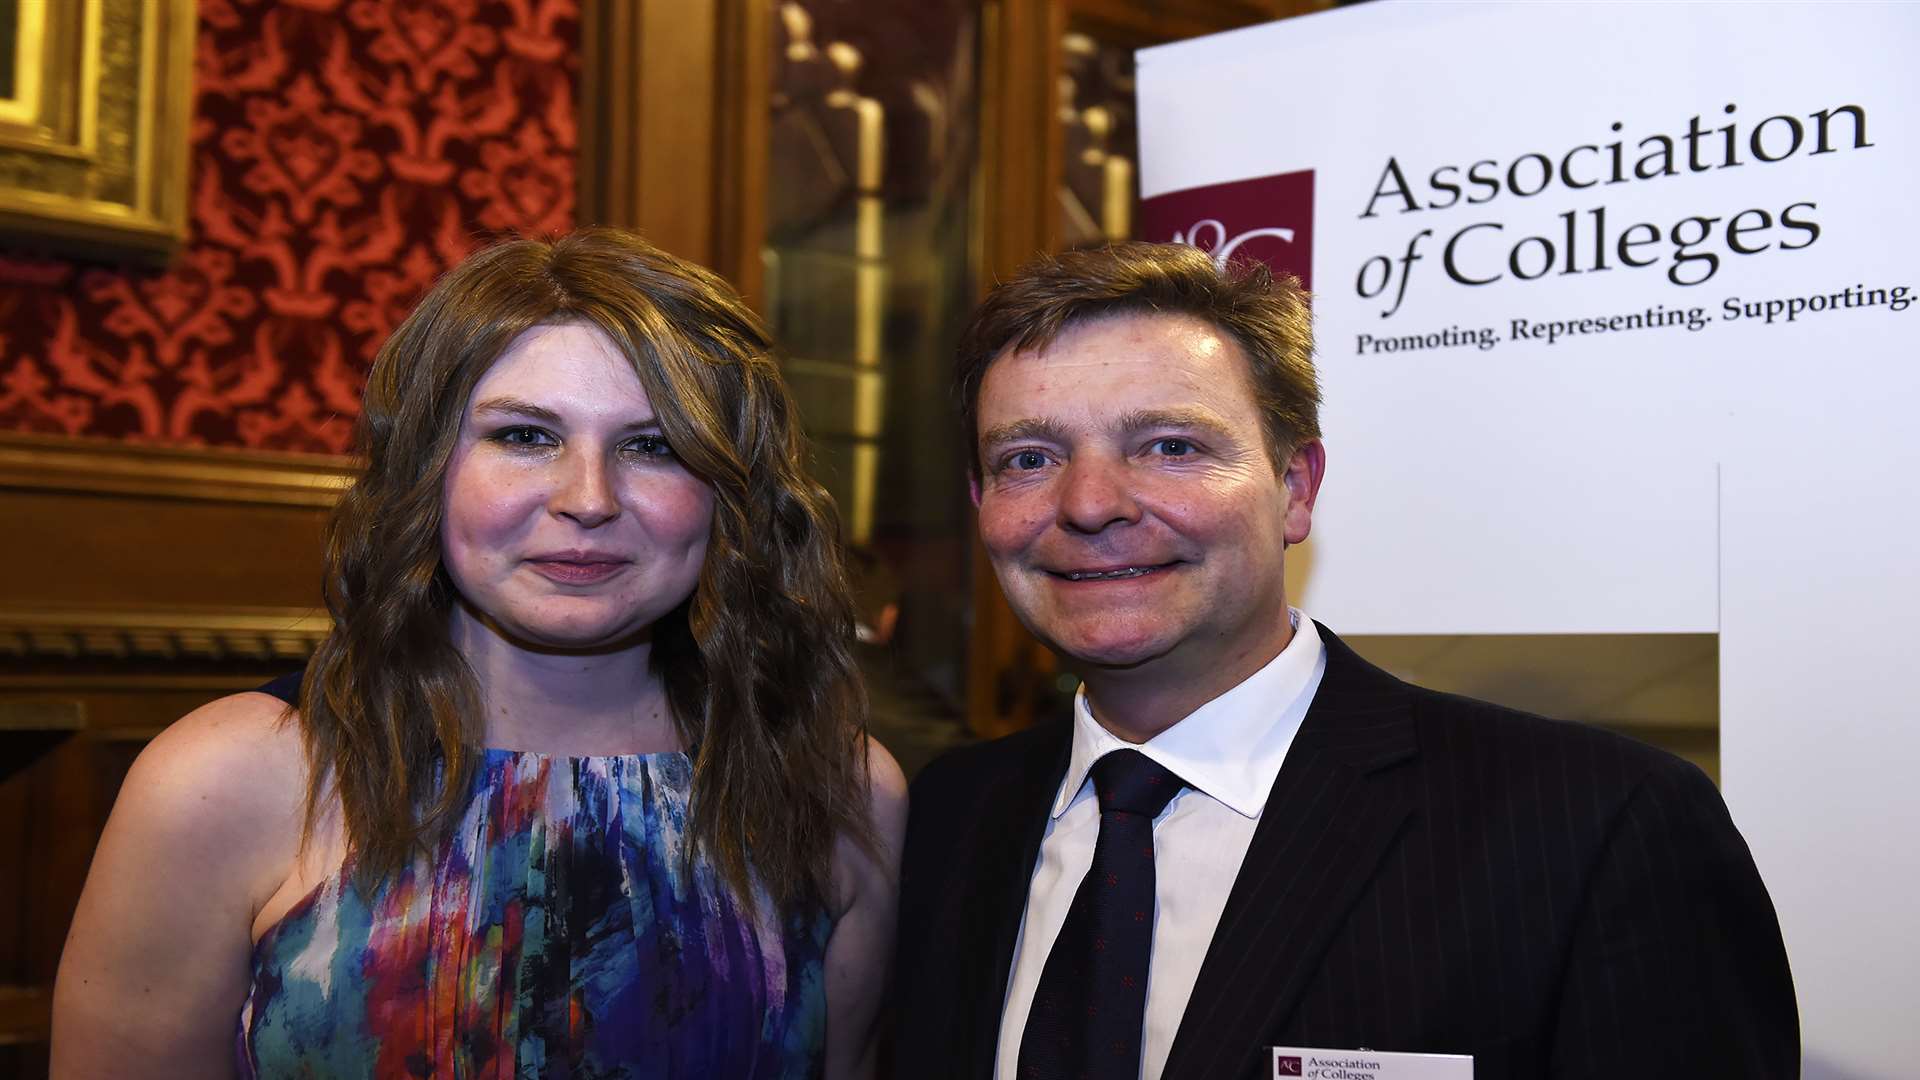 Emily Mackay was commended at a ceremony for the winners of the Student of the Year Award